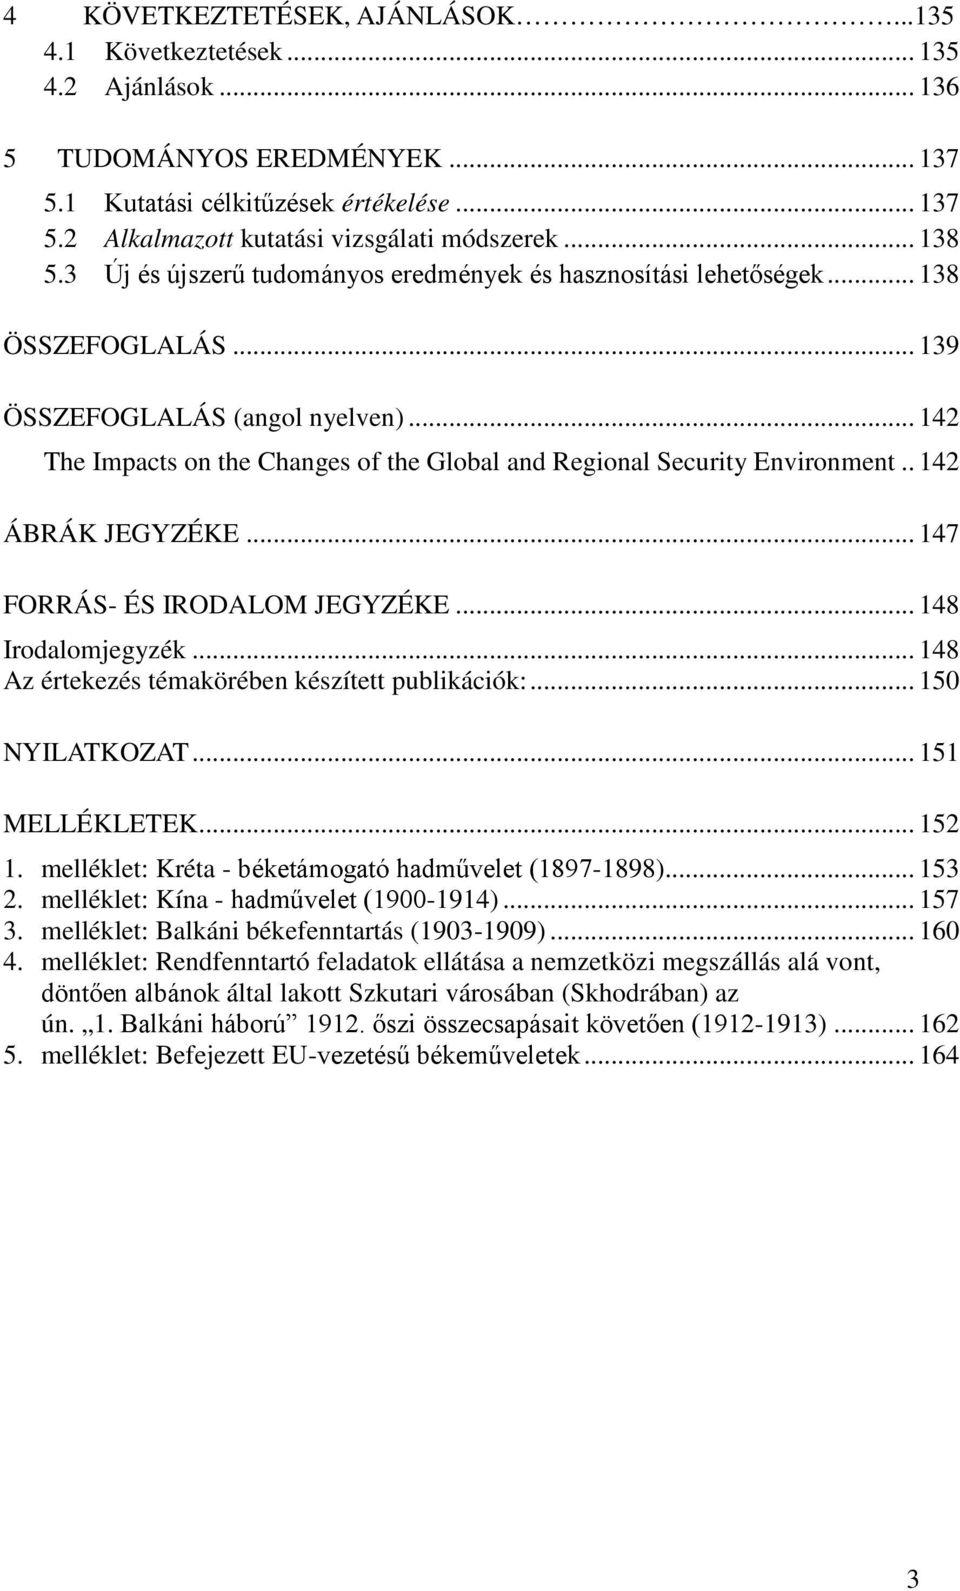 .. 142 The Impacts on the Changes of the Global and Regional Security Environment.. 142 ÁBRÁK JEGYZÉKE... 147 FORRÁS- ÉS IRODALOM JEGYZÉKE... 148 Irodalomjegyzék.